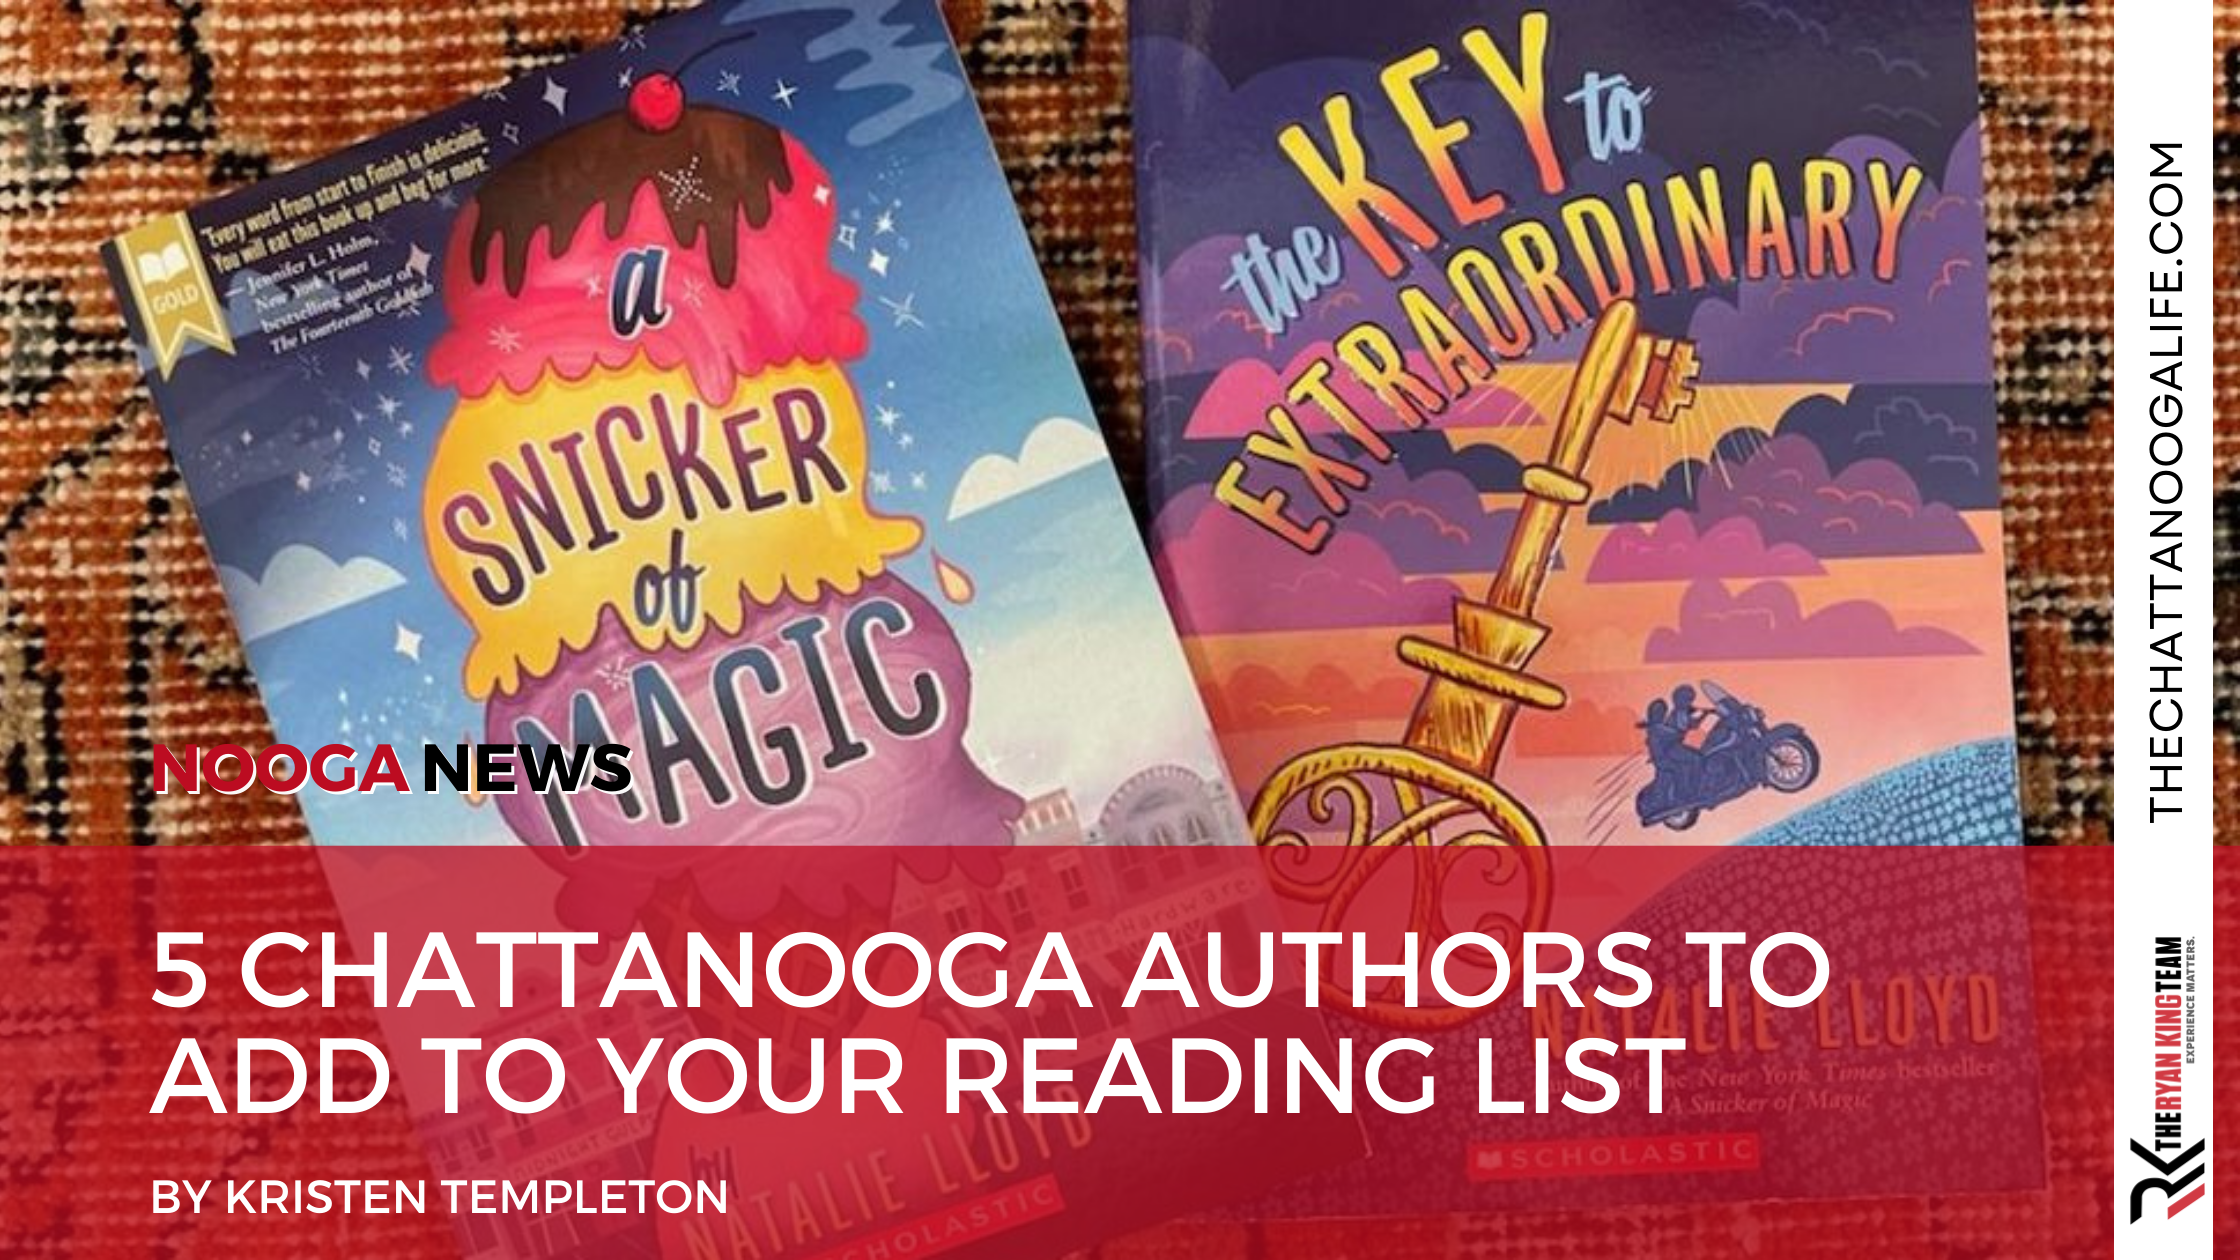 5 Chattanooga Authors to Add To Your Reading List